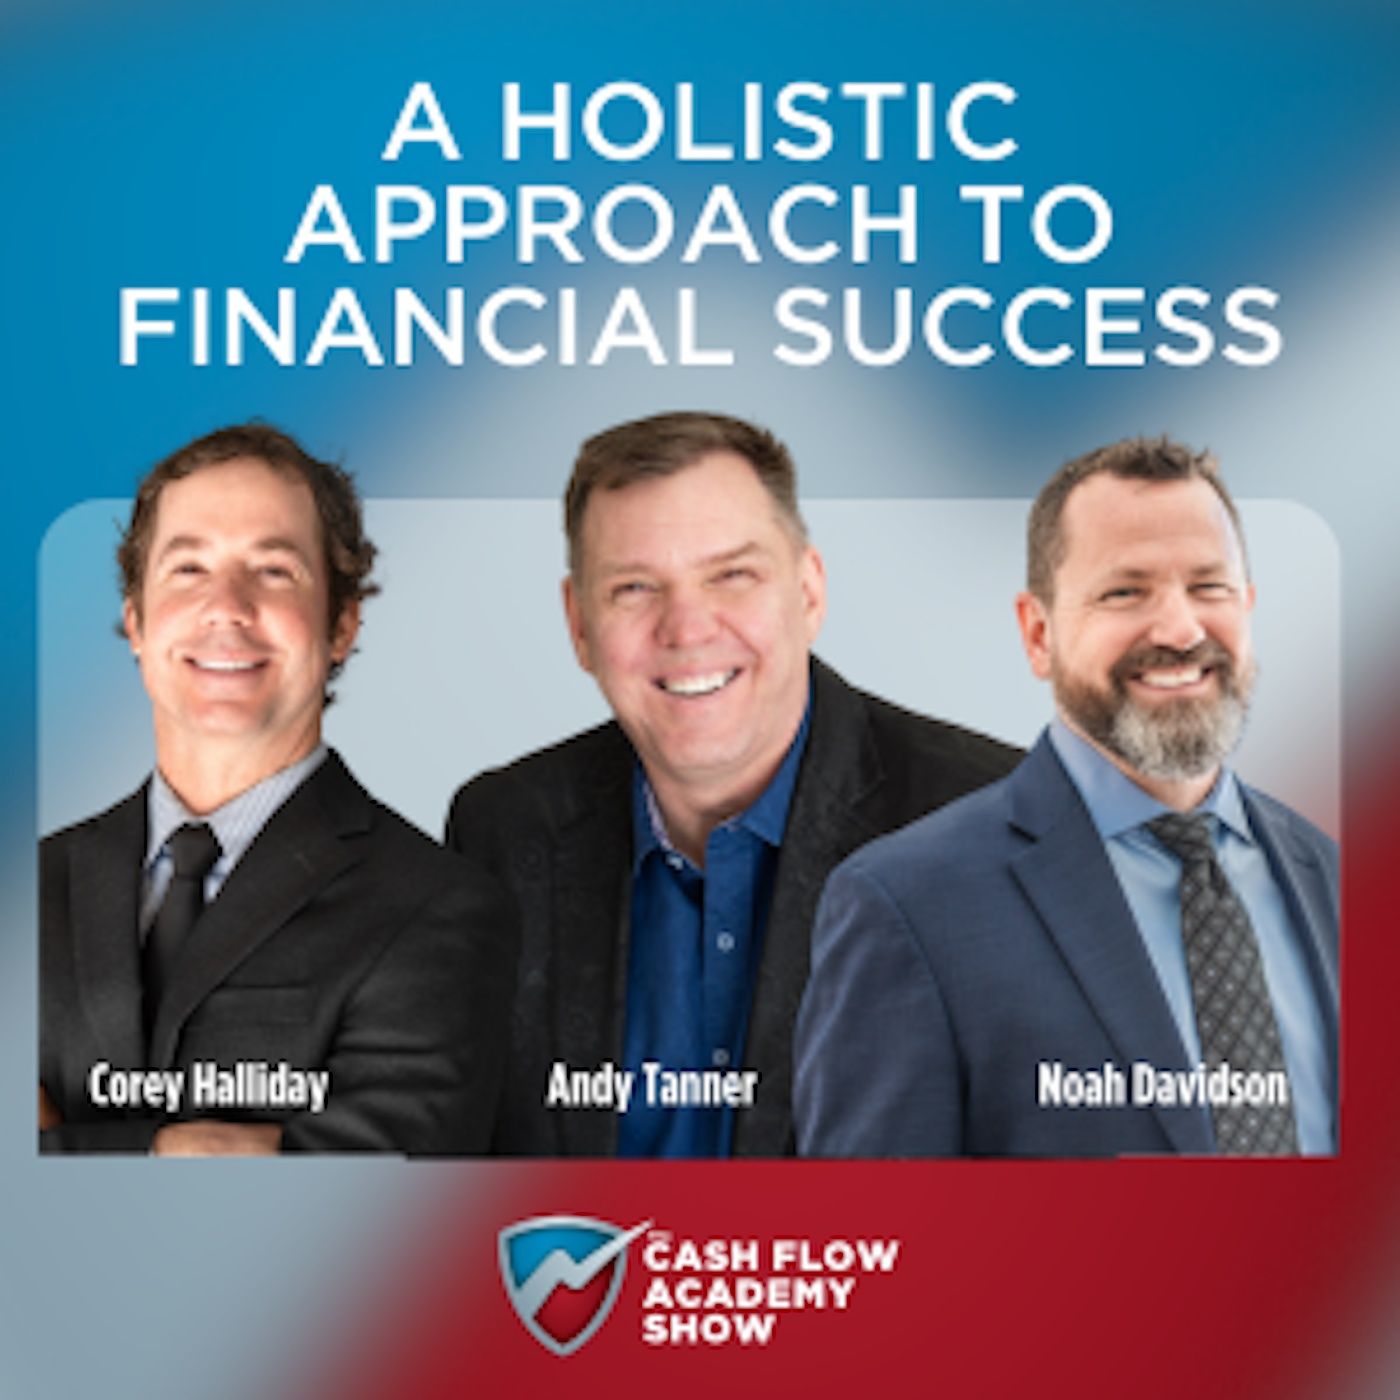 A Holistic Approach to Financial Success